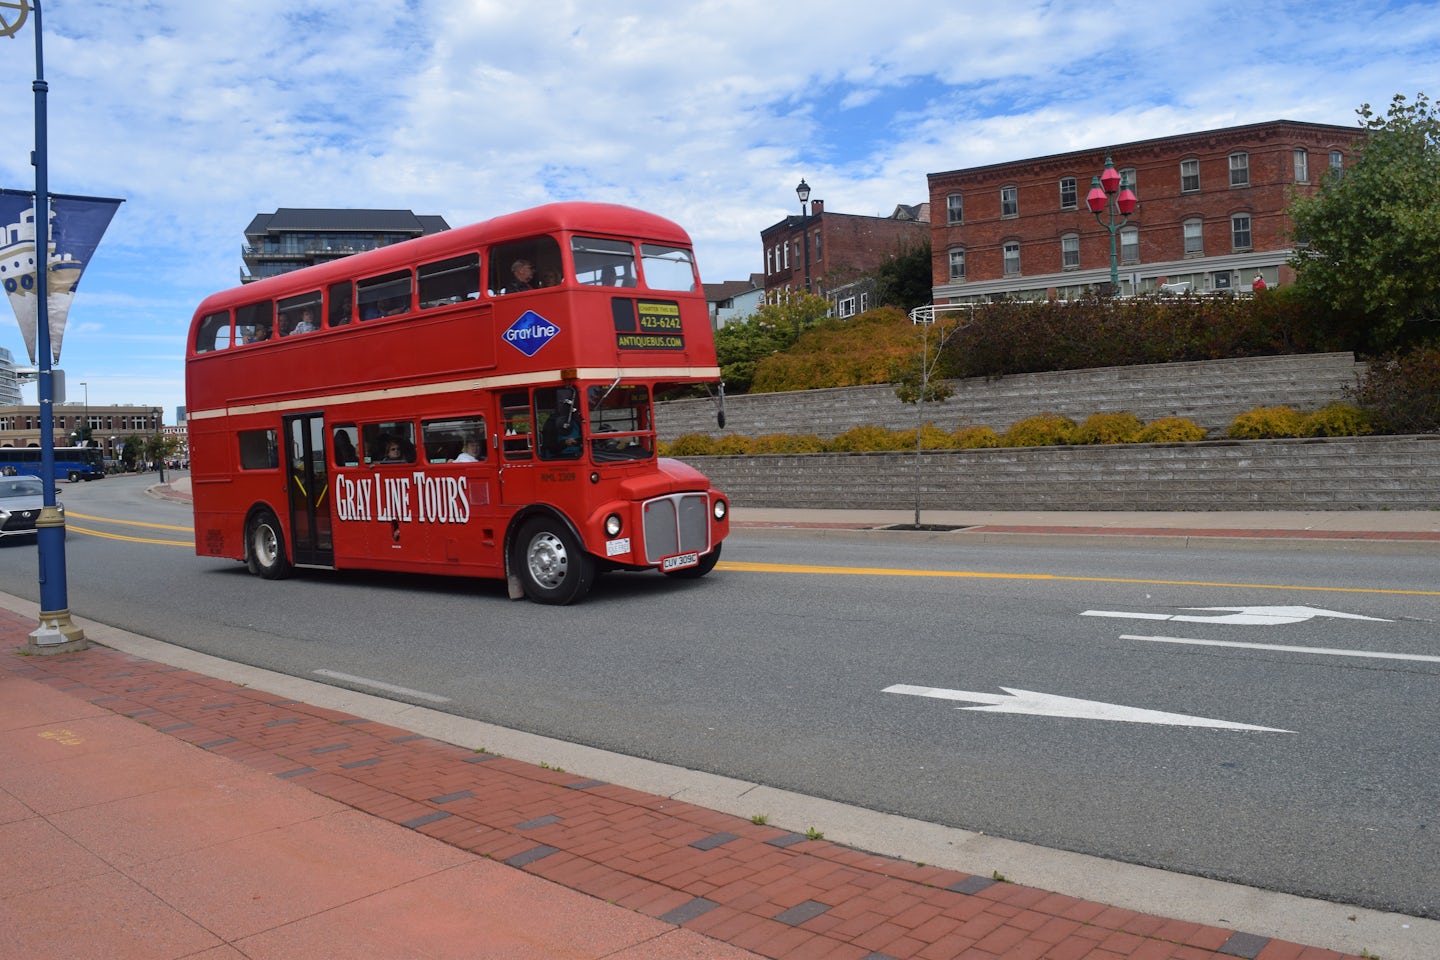 One of the tour buses in Canada, New Brunswick.